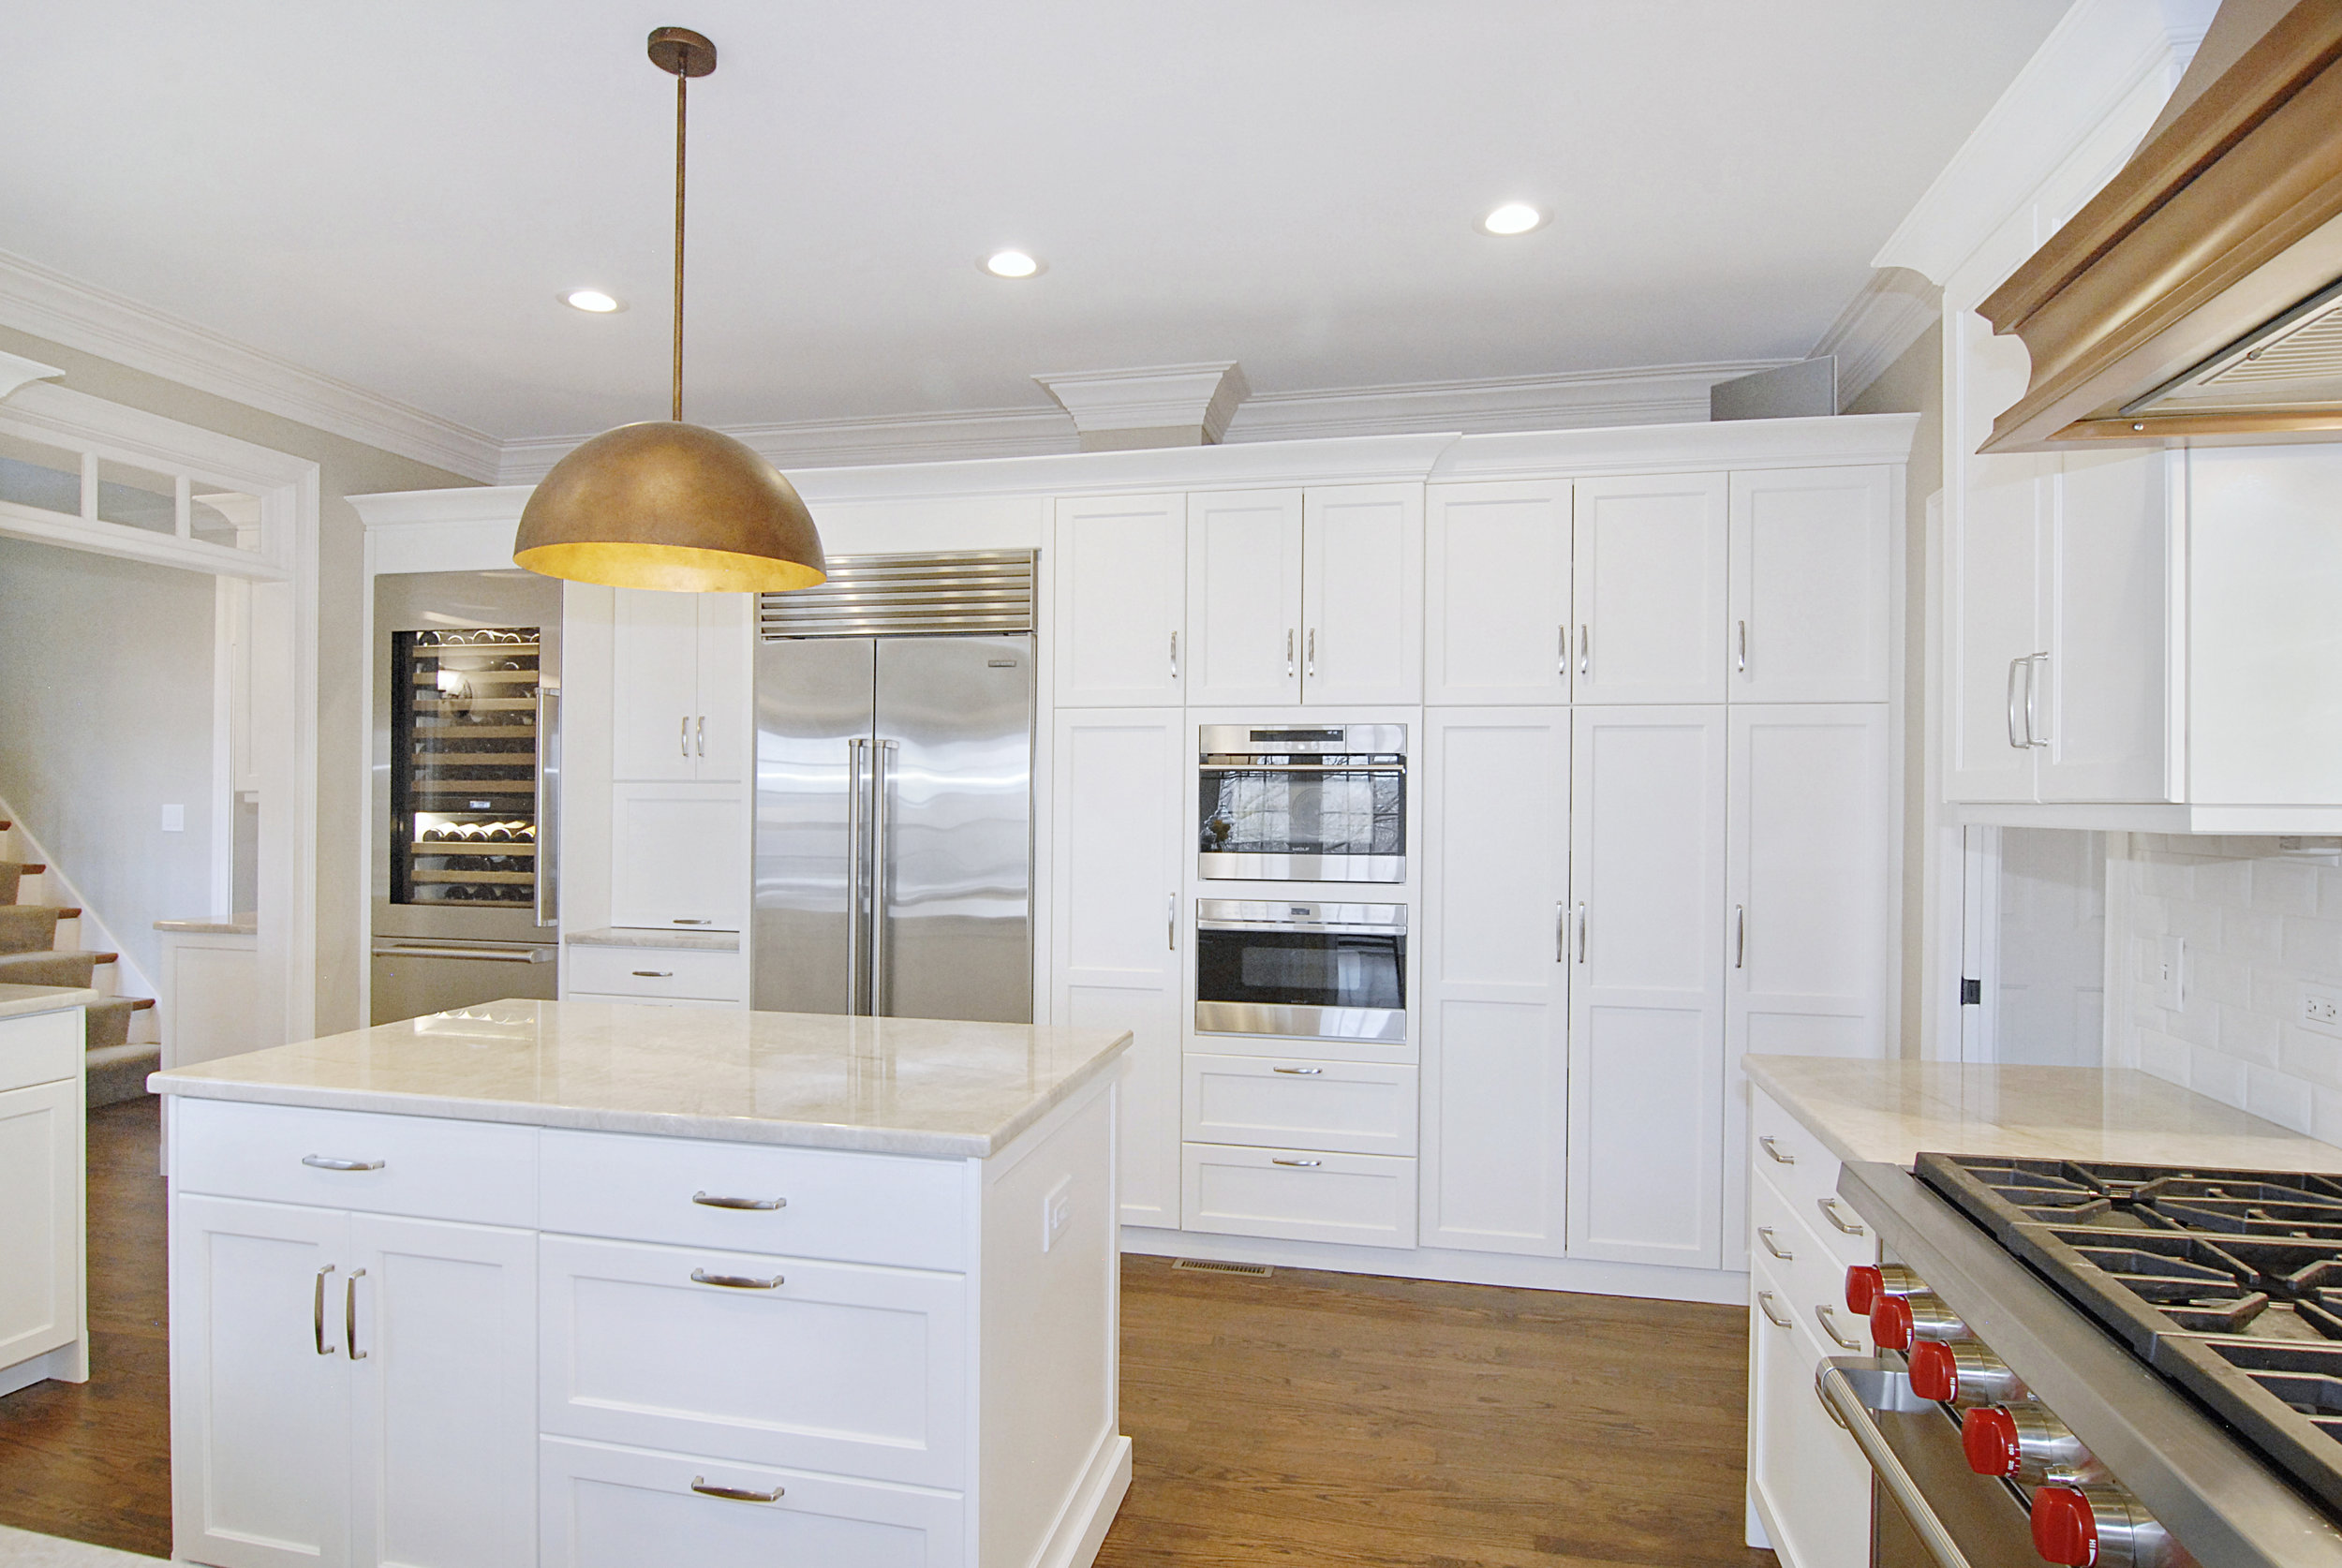 WOLF AND SUBZERO KITCHEN WITH WHITE CABINETRY 